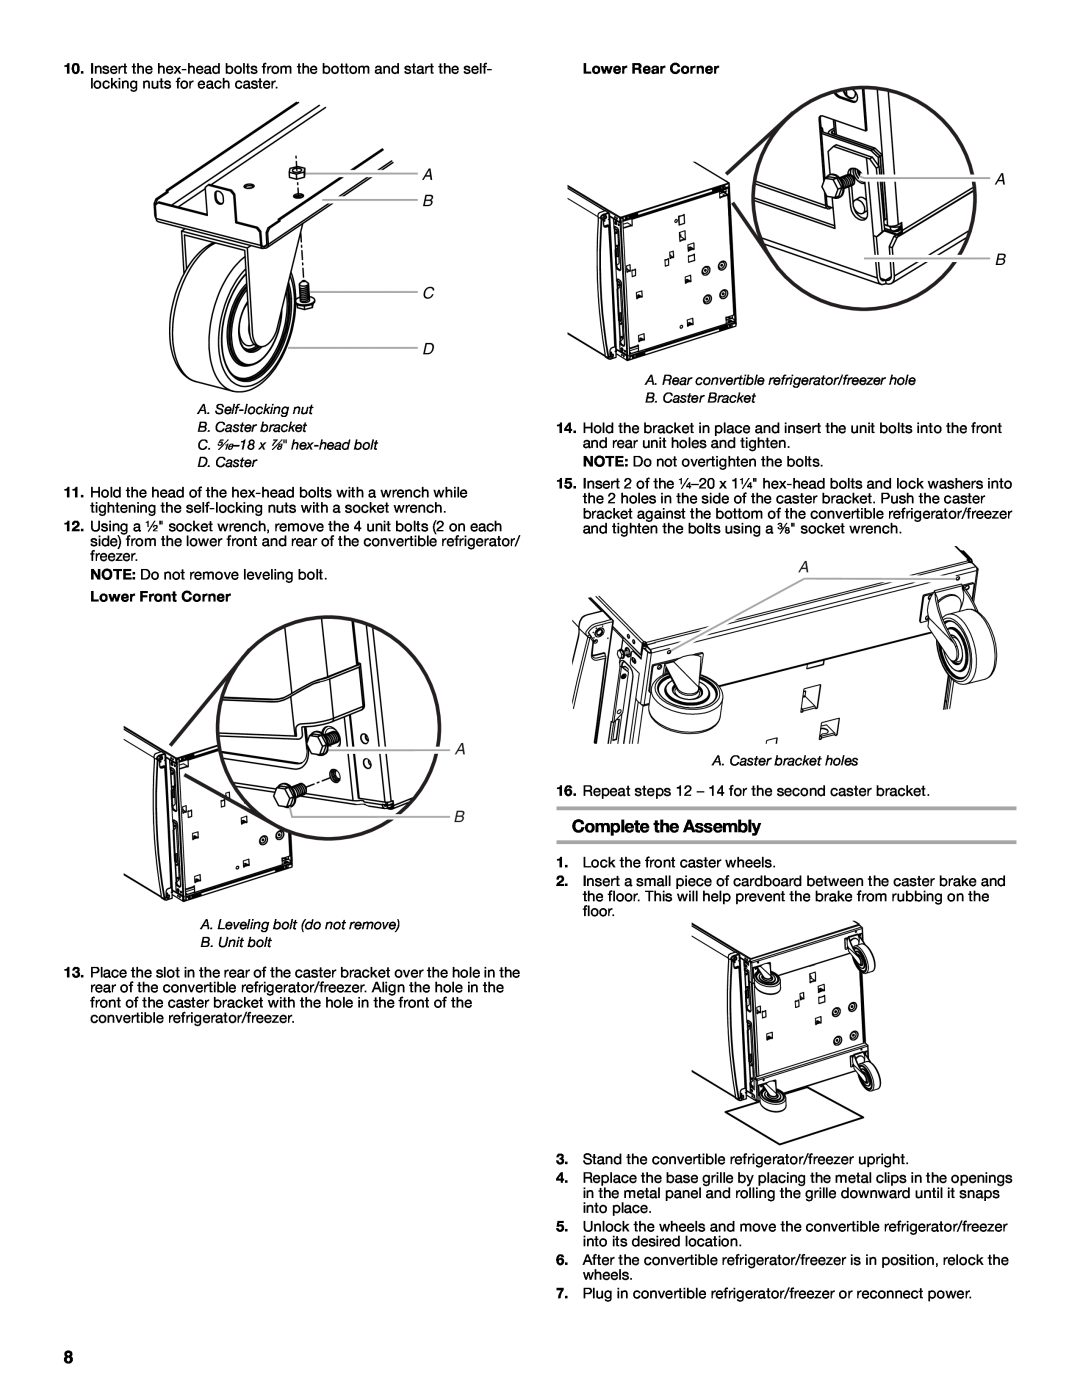 Whirlpool GAFZ21XXMK00 manual Complete the Assembly, A B C D, D. Caster, A. Leveling bolt do not remove B. Unit bolt 